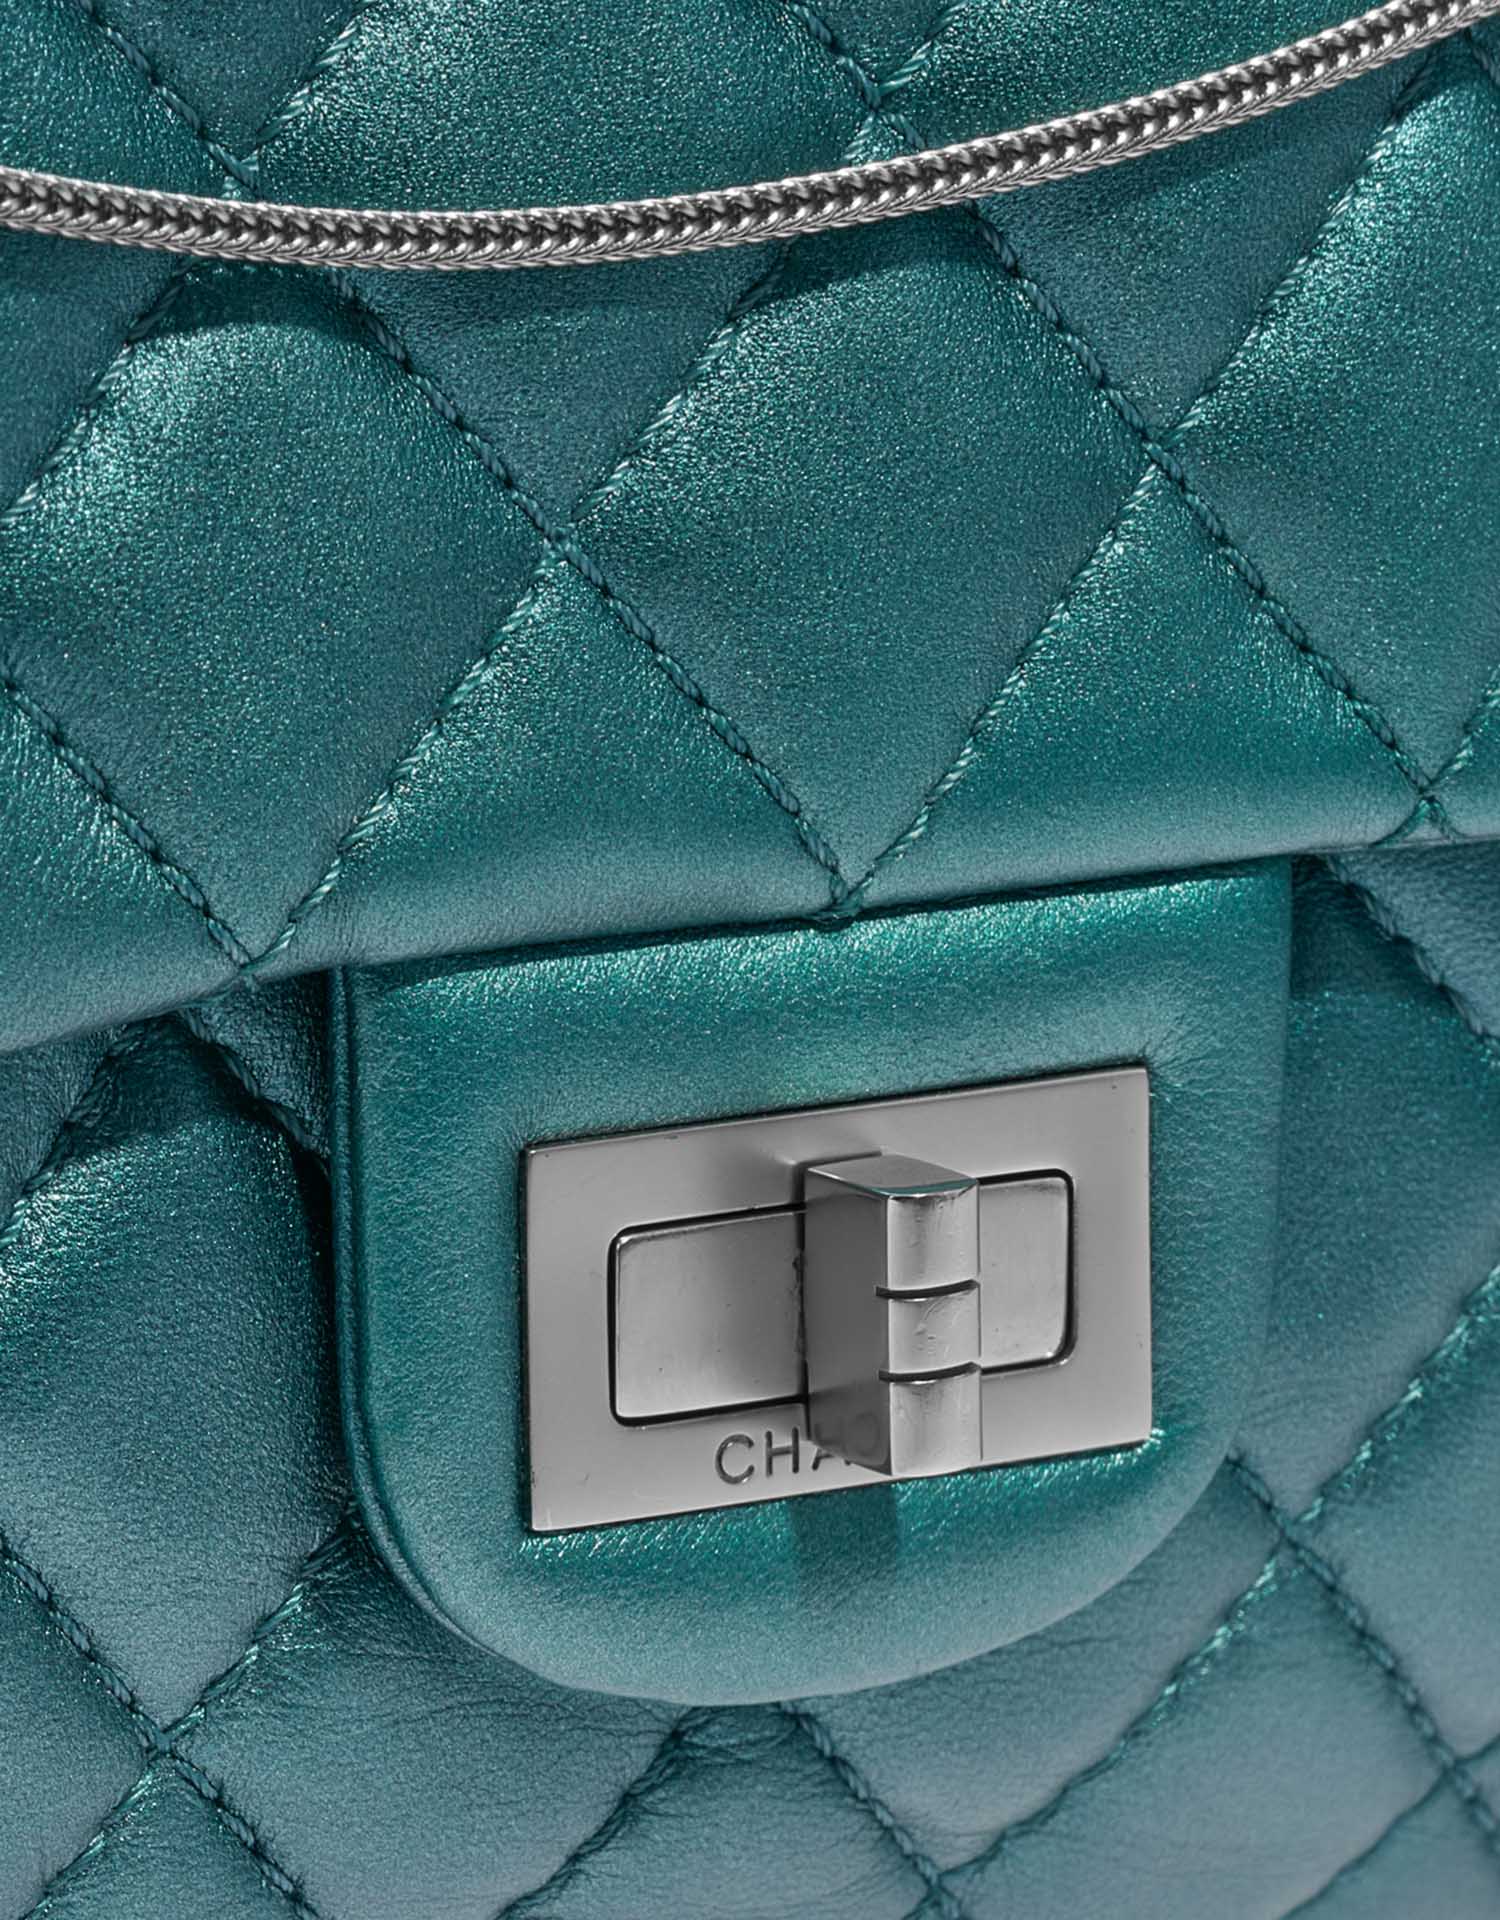 Pre-owned Chanel bag 2.55 Reissue 226 Lamb Metallic Blue Blue Closing System | Sell your designer bag on Saclab.com